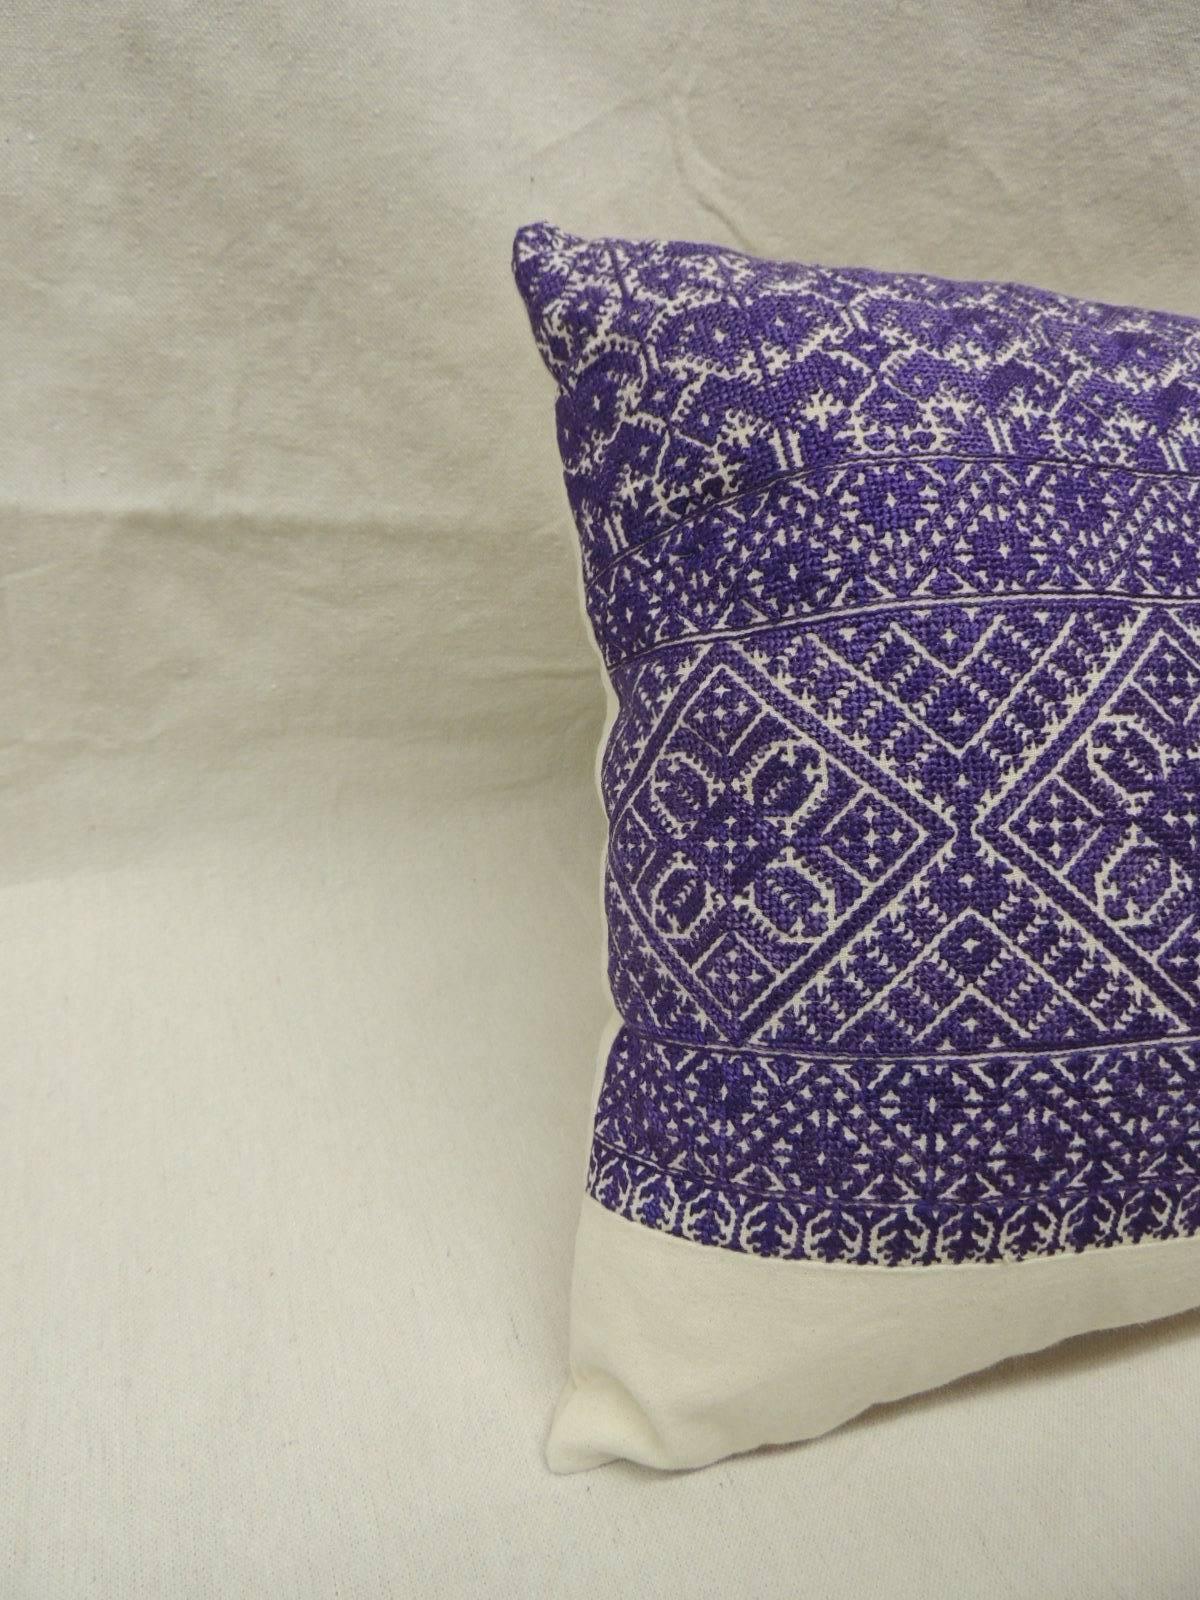 Antique Textiles Galleries...
Purple embroidery Fez antique textile bolster pillow with natural linen frame and backing.  Pillow hand-made and designed in the USA.  Closure by stitch (no zipper) with custom made pillow insert.
Ideal for a sofa, club